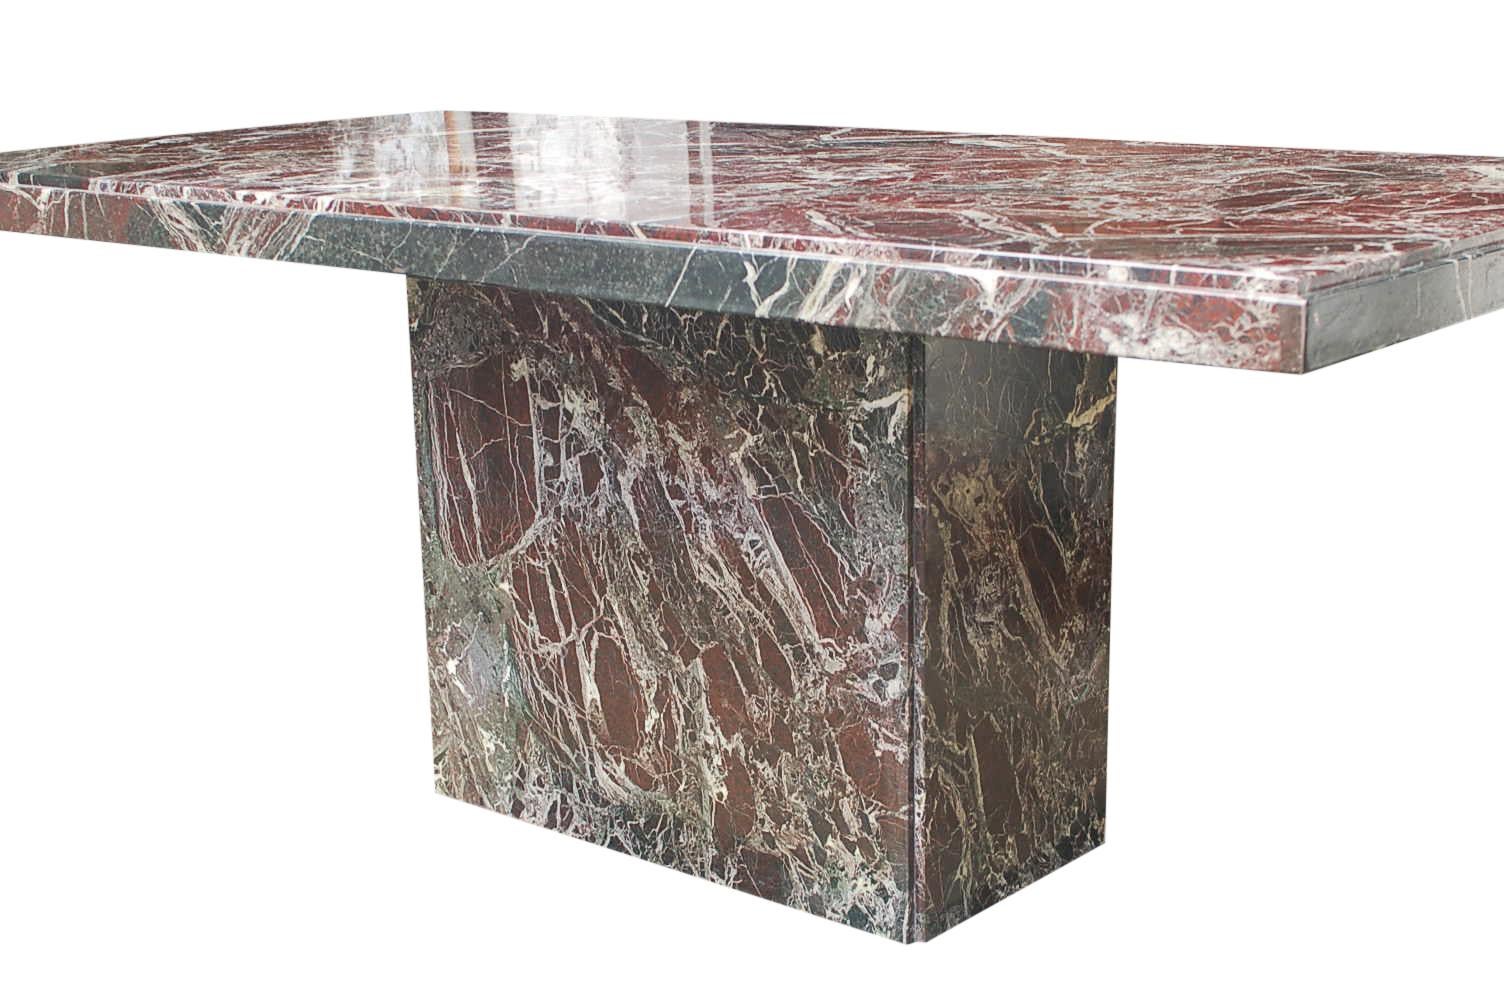 A large and impressive marble dining table from Italy, circa 1970s. It features all slab marble construction in shades of black, gray, burgundy and white.